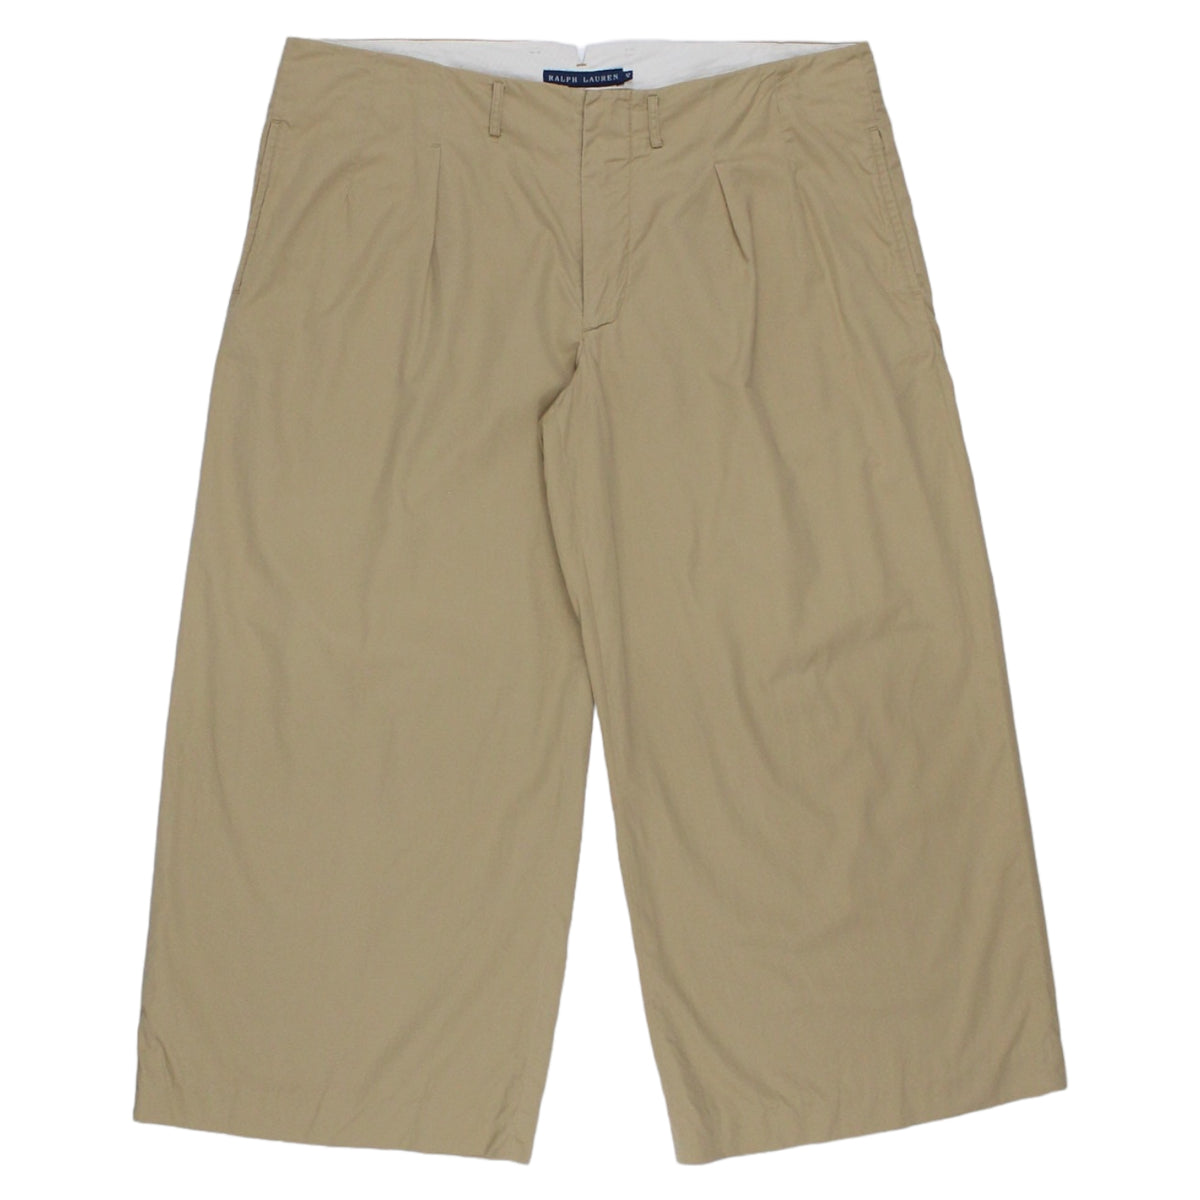 Ralph Lauren Sand, Cropped, Pleated Chino's